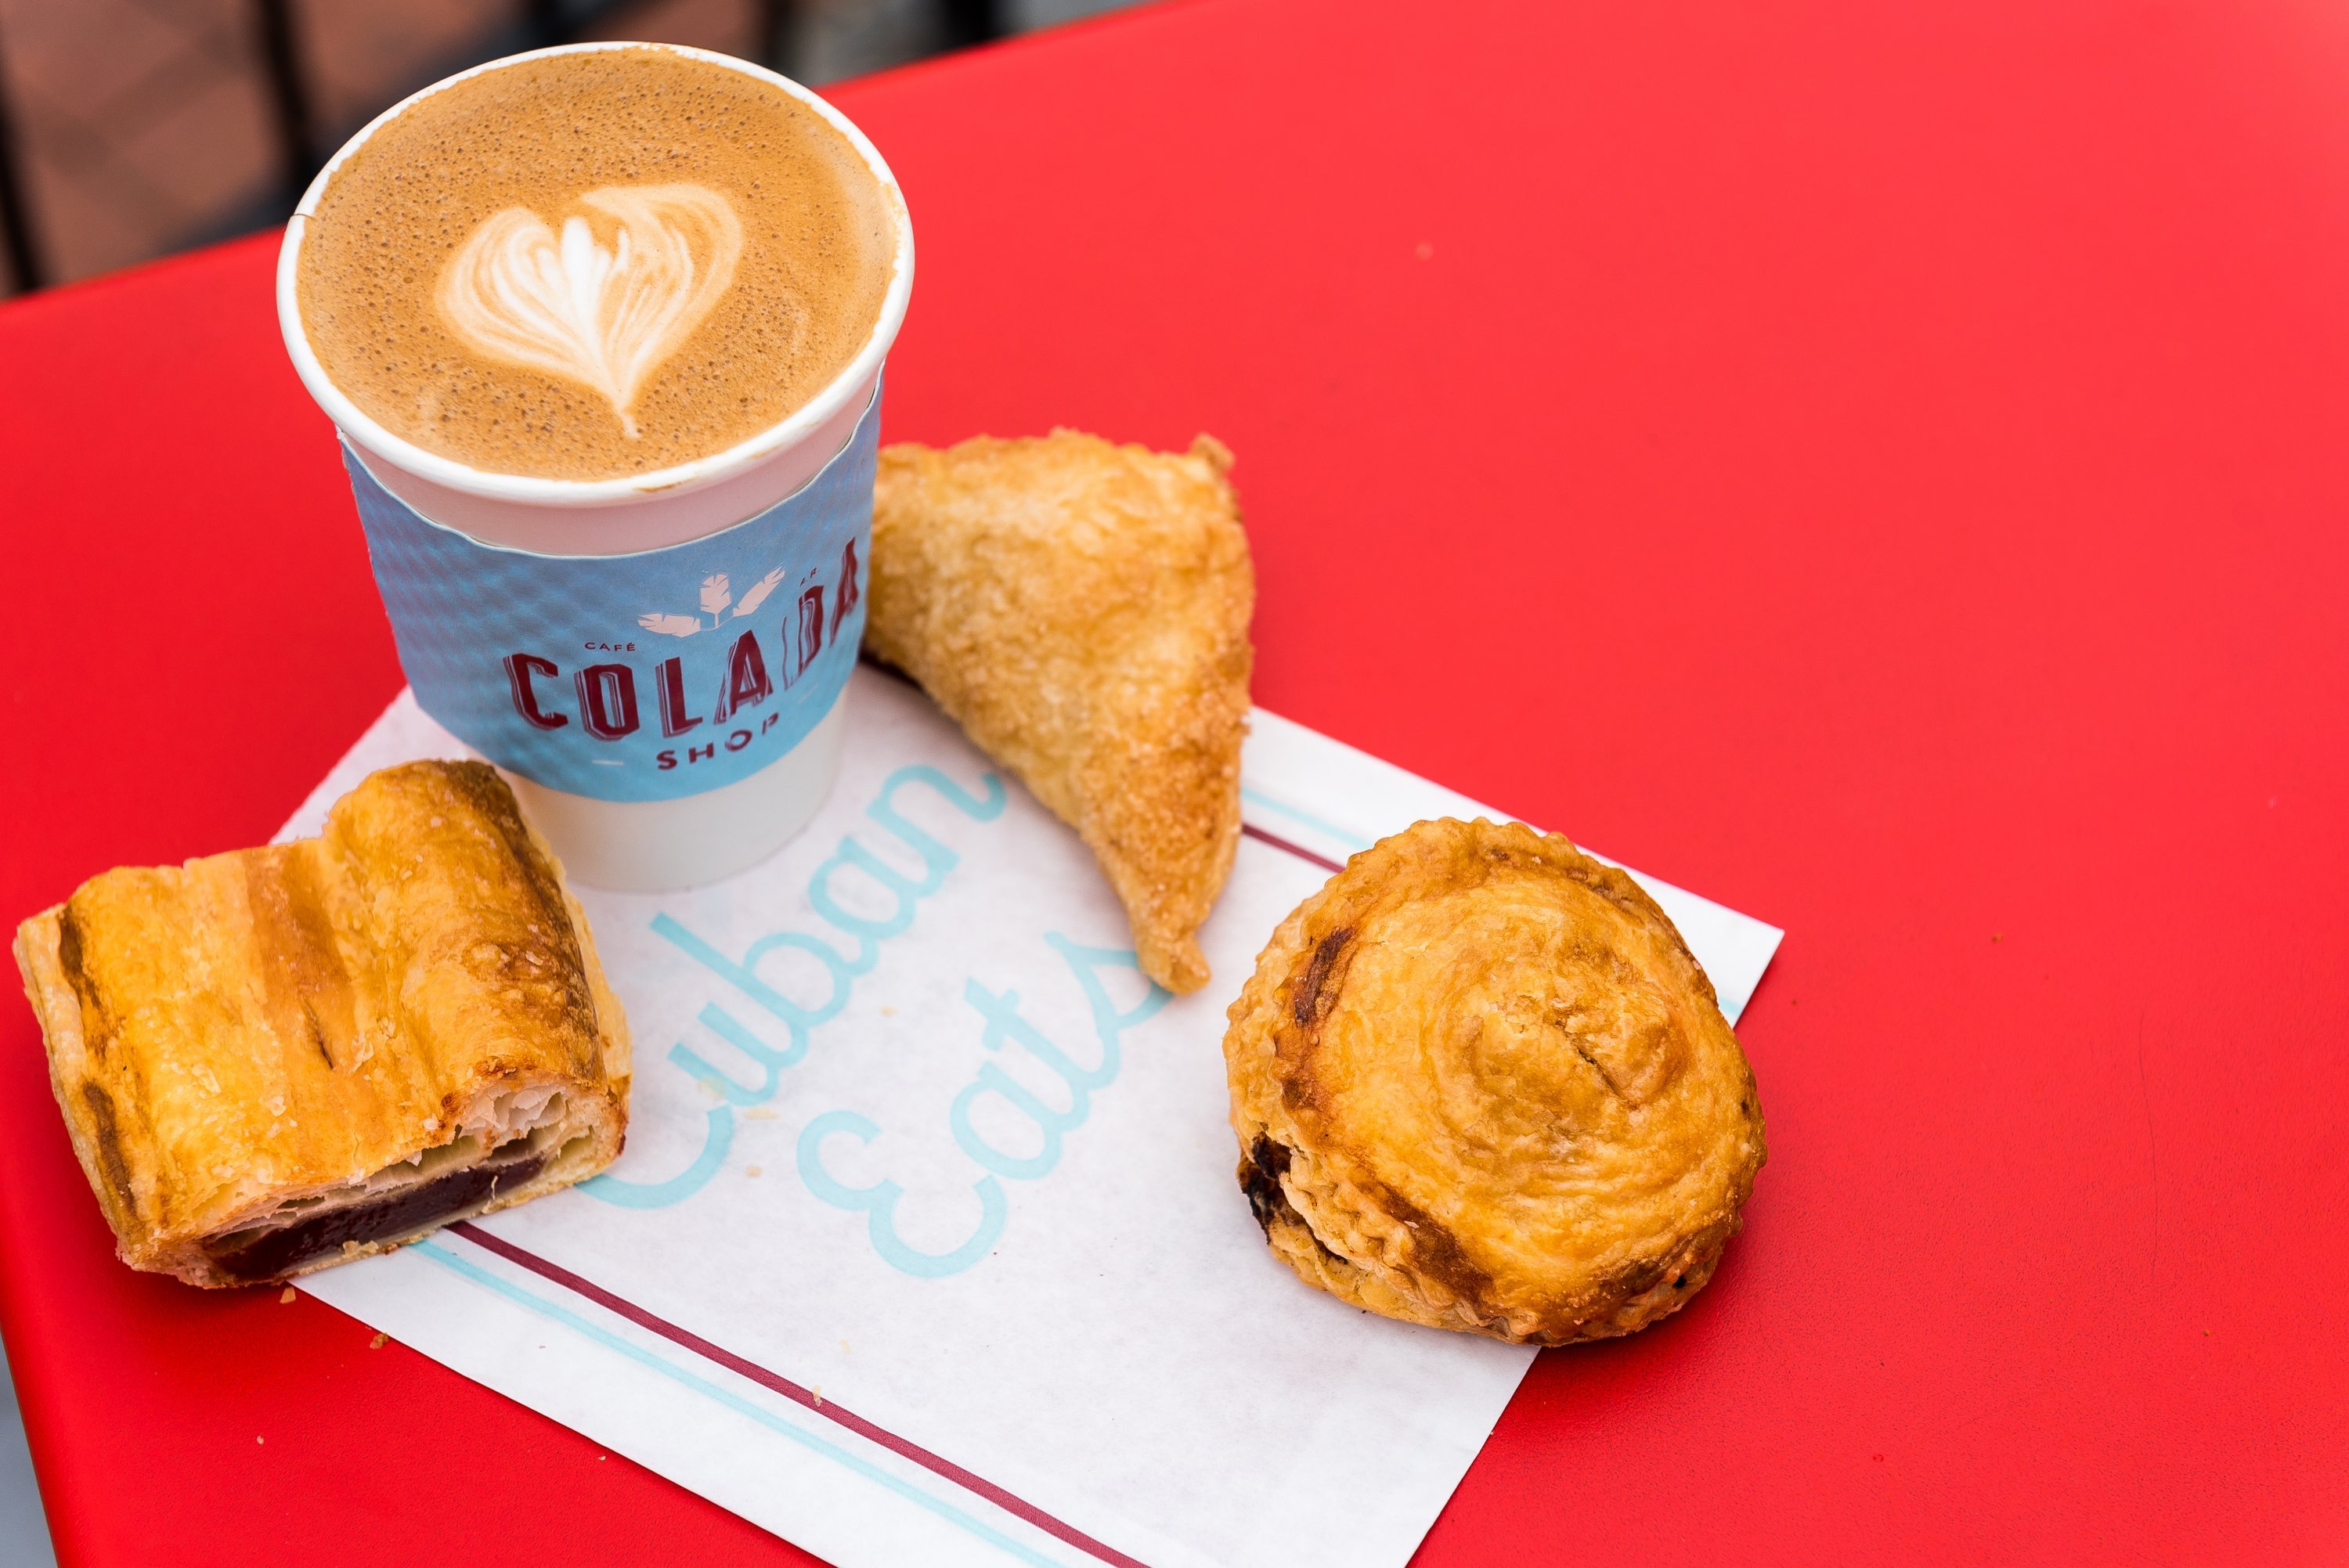 Coffee and pastries at Colada Shop. Photograph courtesy of Colada Shop.